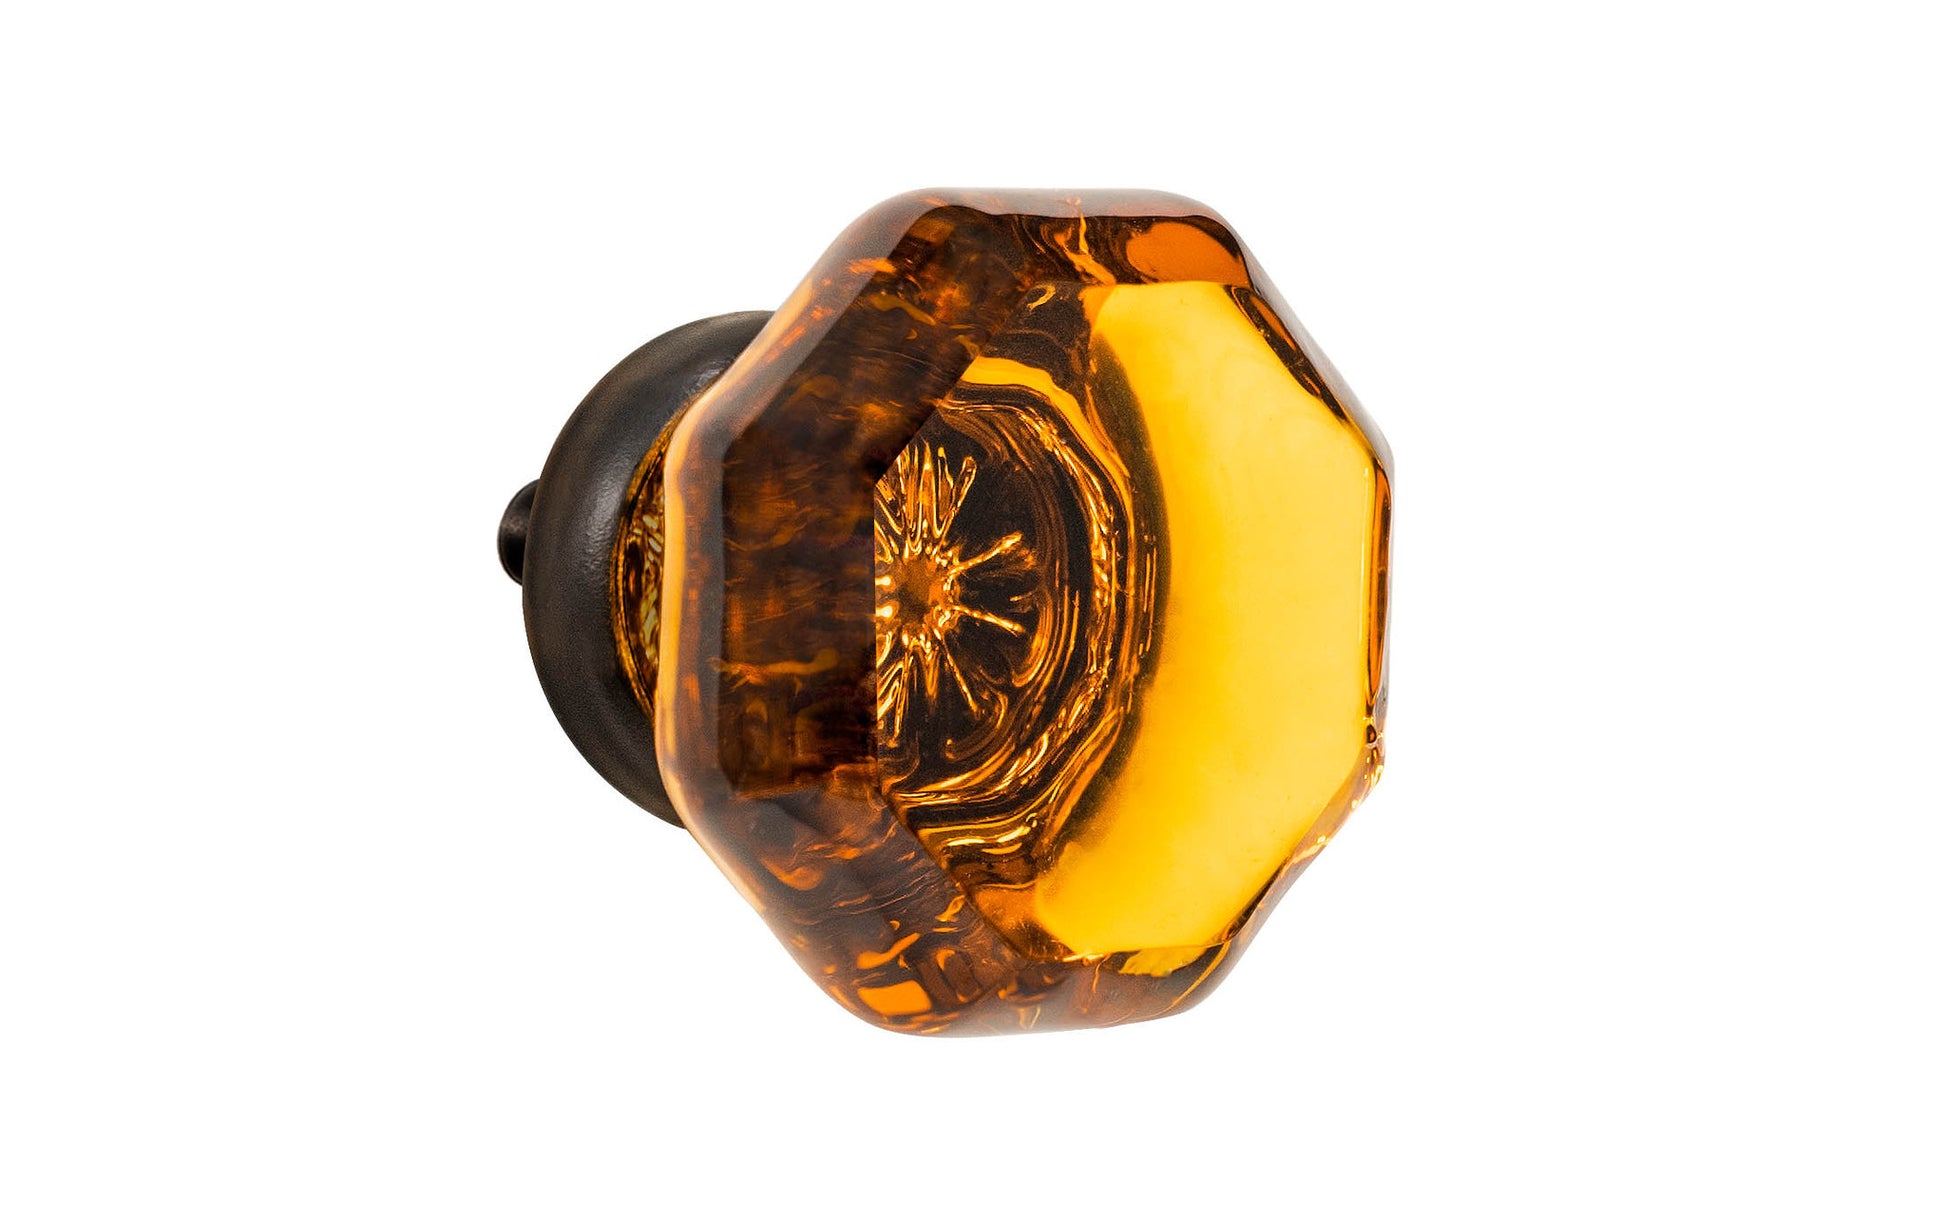 Elegant & classic octagonal cabinet glass knob with an attractive "Amber" color. The glass is carefully set into a handsome solid brass base with a threaded shank in the back. Oil rubbed bronze finish on solid brass base. Octagon shape knob. 1-1/4" Diameter Knob